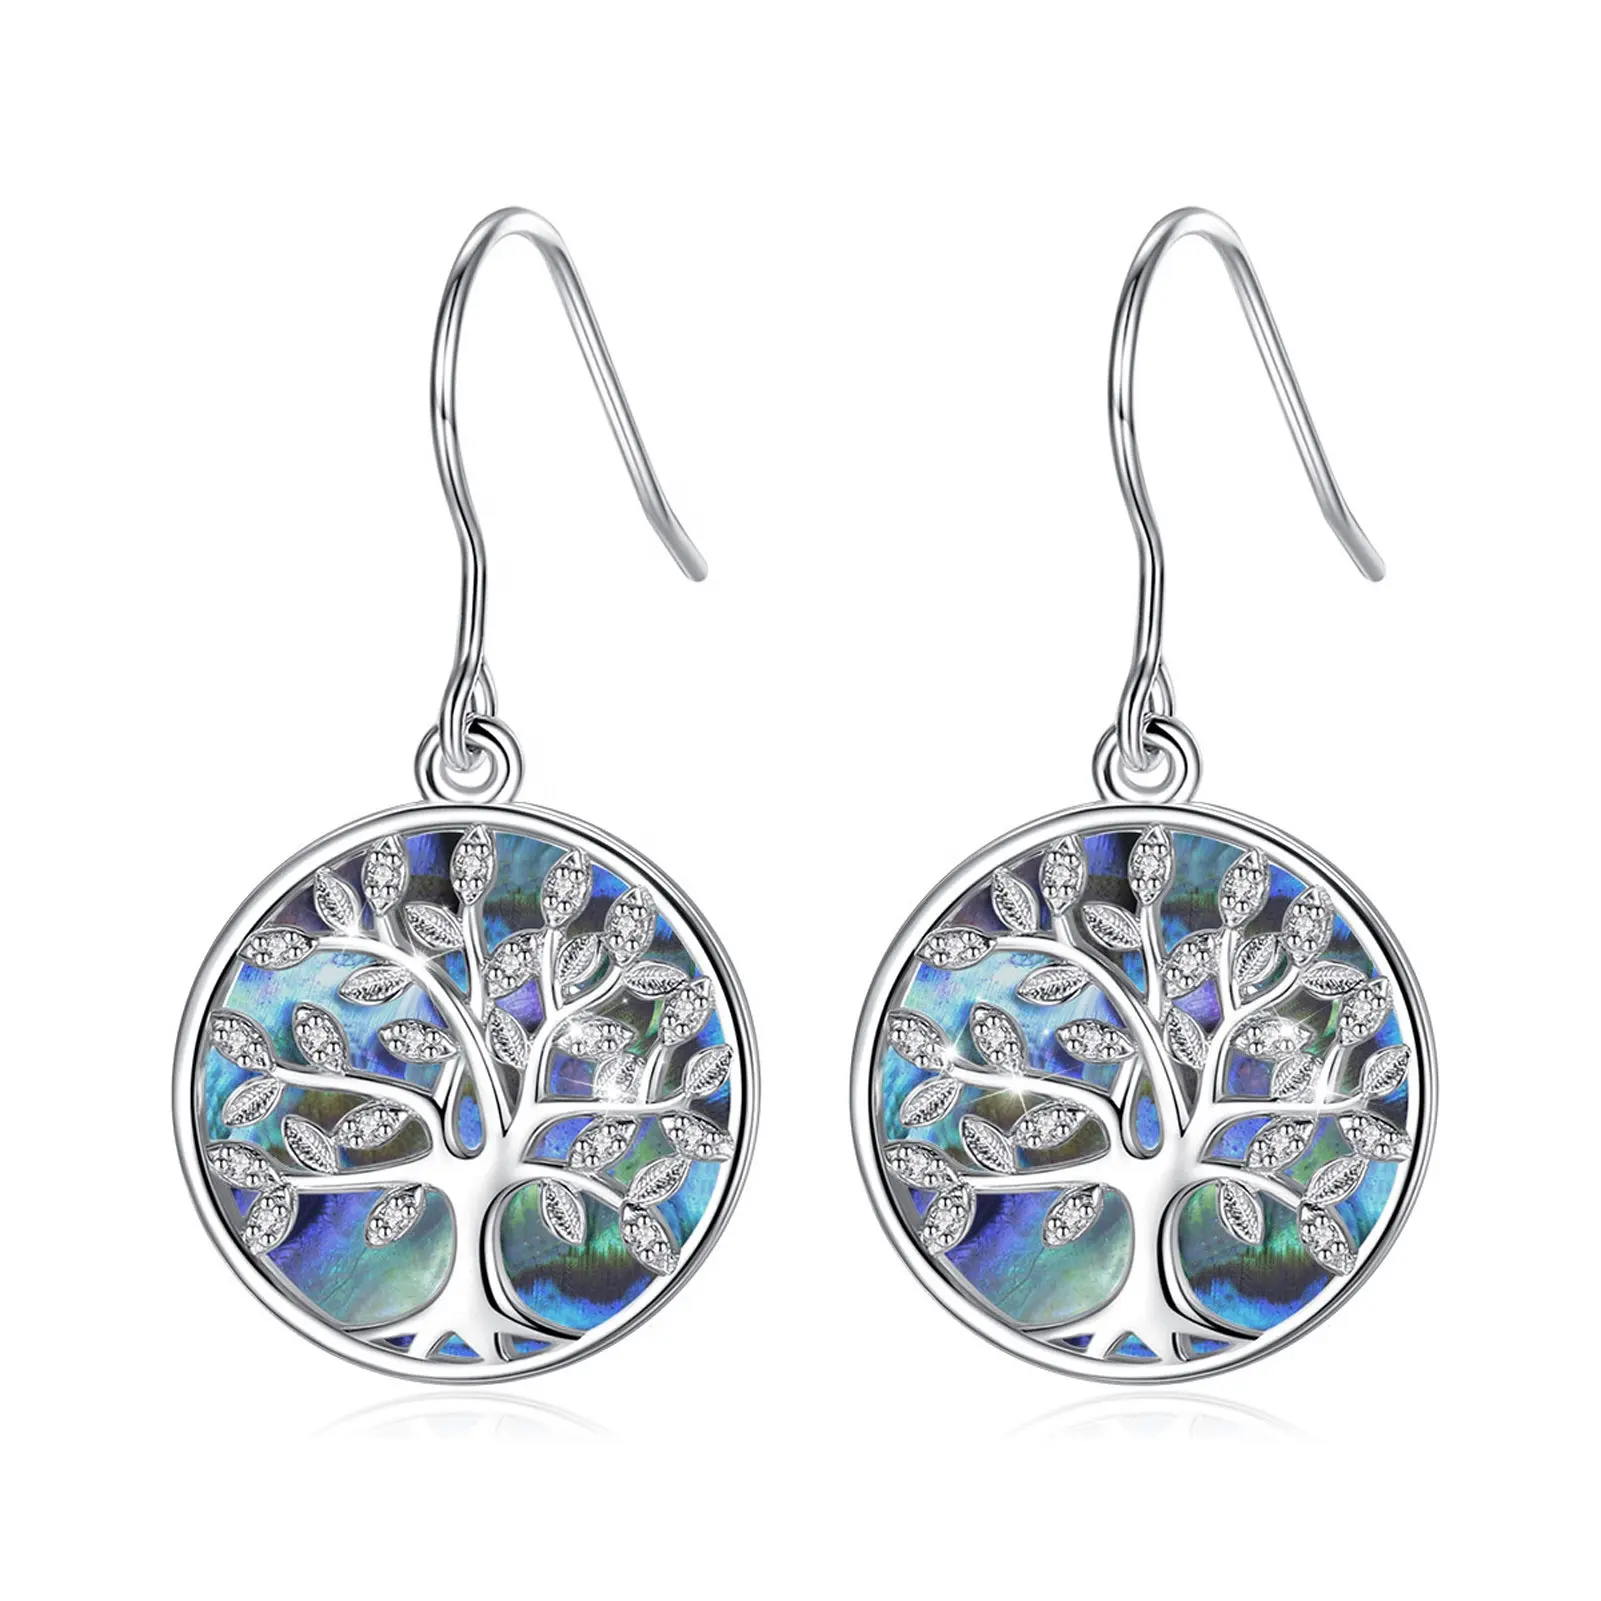 Merryshine 925 sterling silver family tree of life abalone shell dangling drop earring